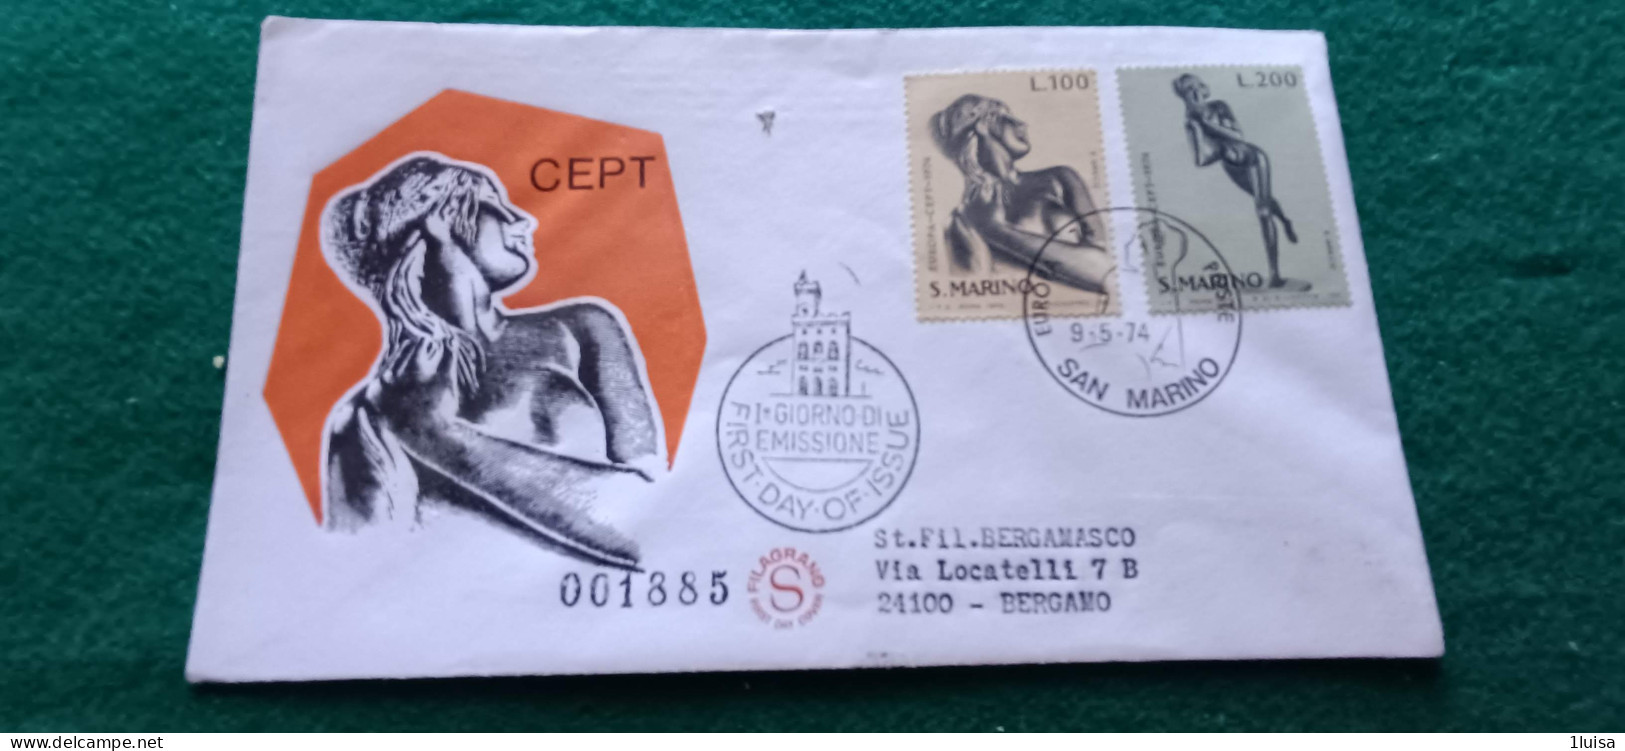 SAN MARINO 9/5/74 CEPT - Express Letter Stamps